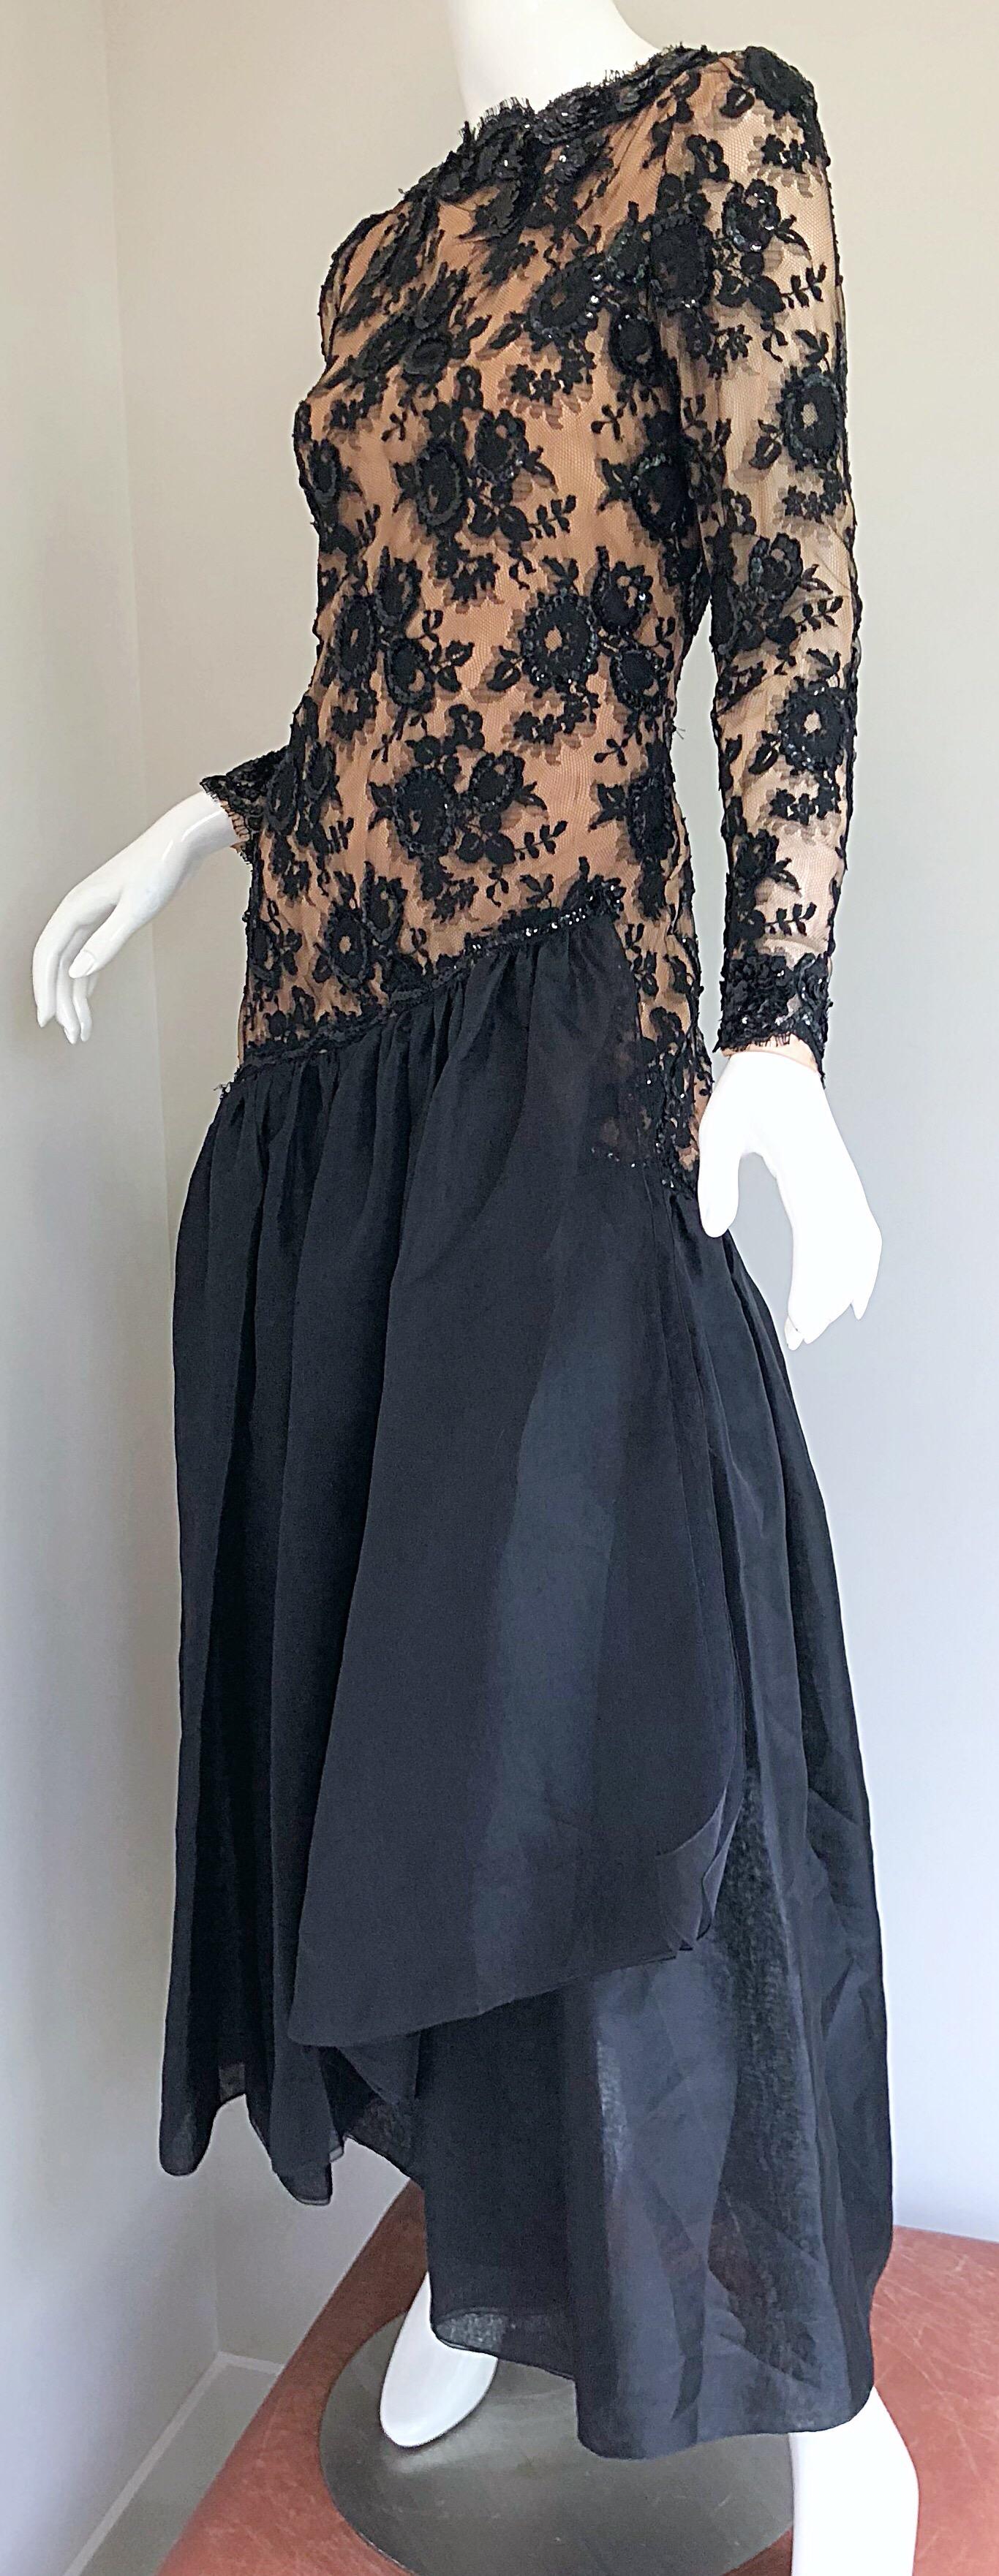 Vintage Bill Blass Black Nude 90s Size 6 / 8 Sequined Chiffon Evening Gown Dress For Sale 4